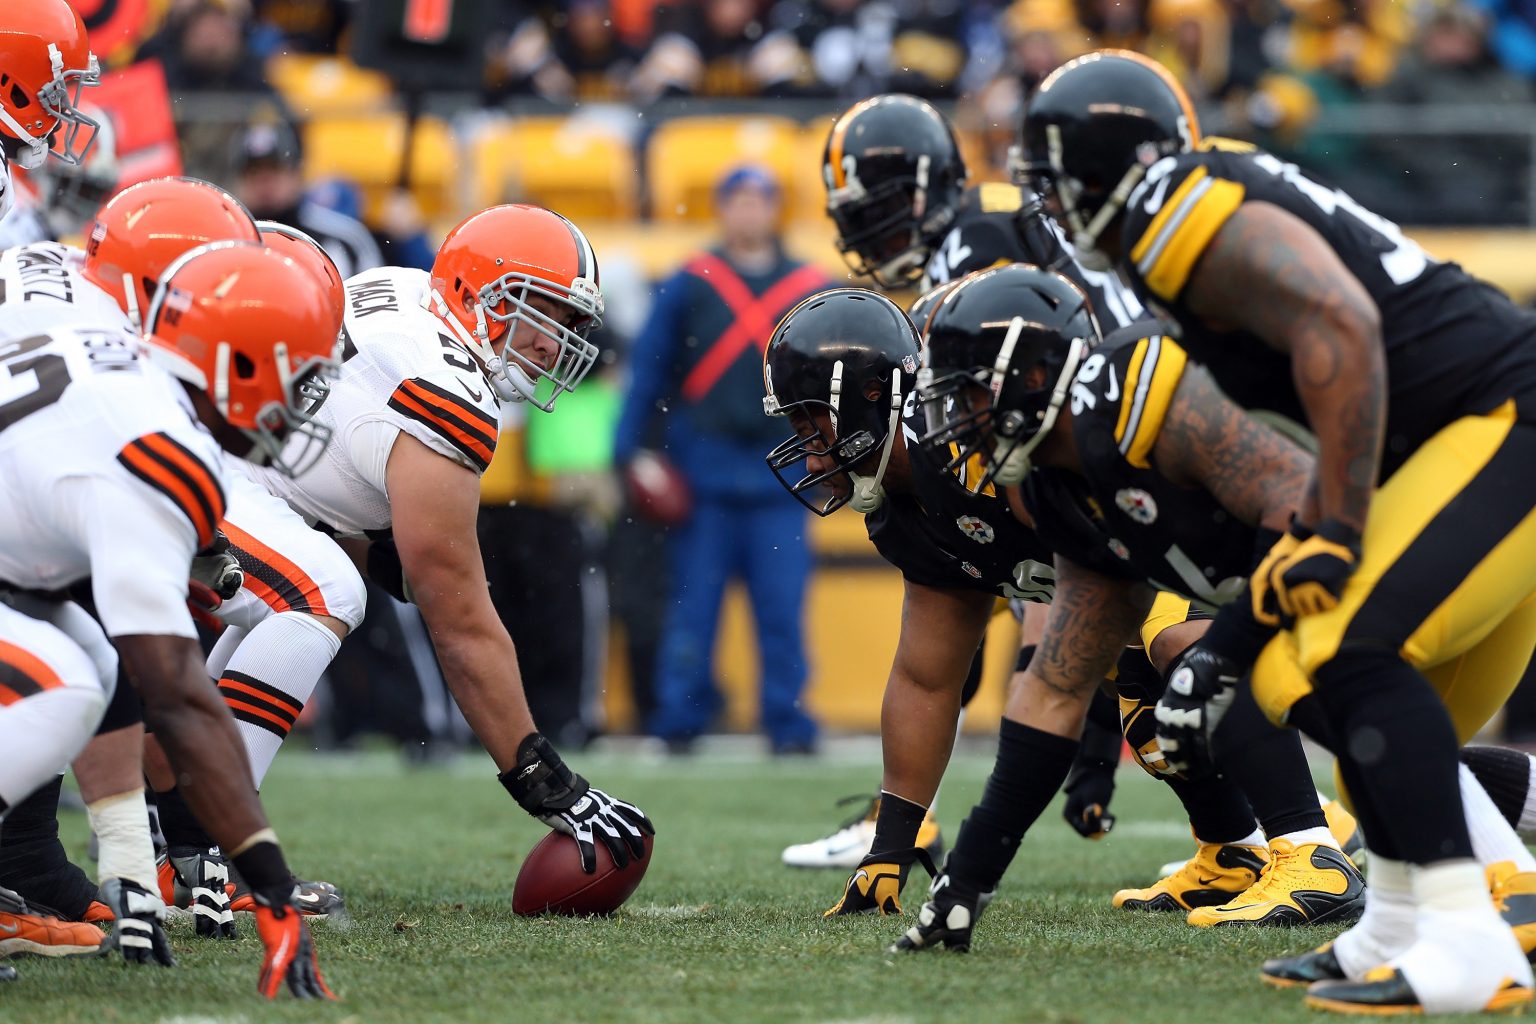 Pittsburgh Steelers vs Cleveland Browns Week 3 2022 TV Coverage, Live